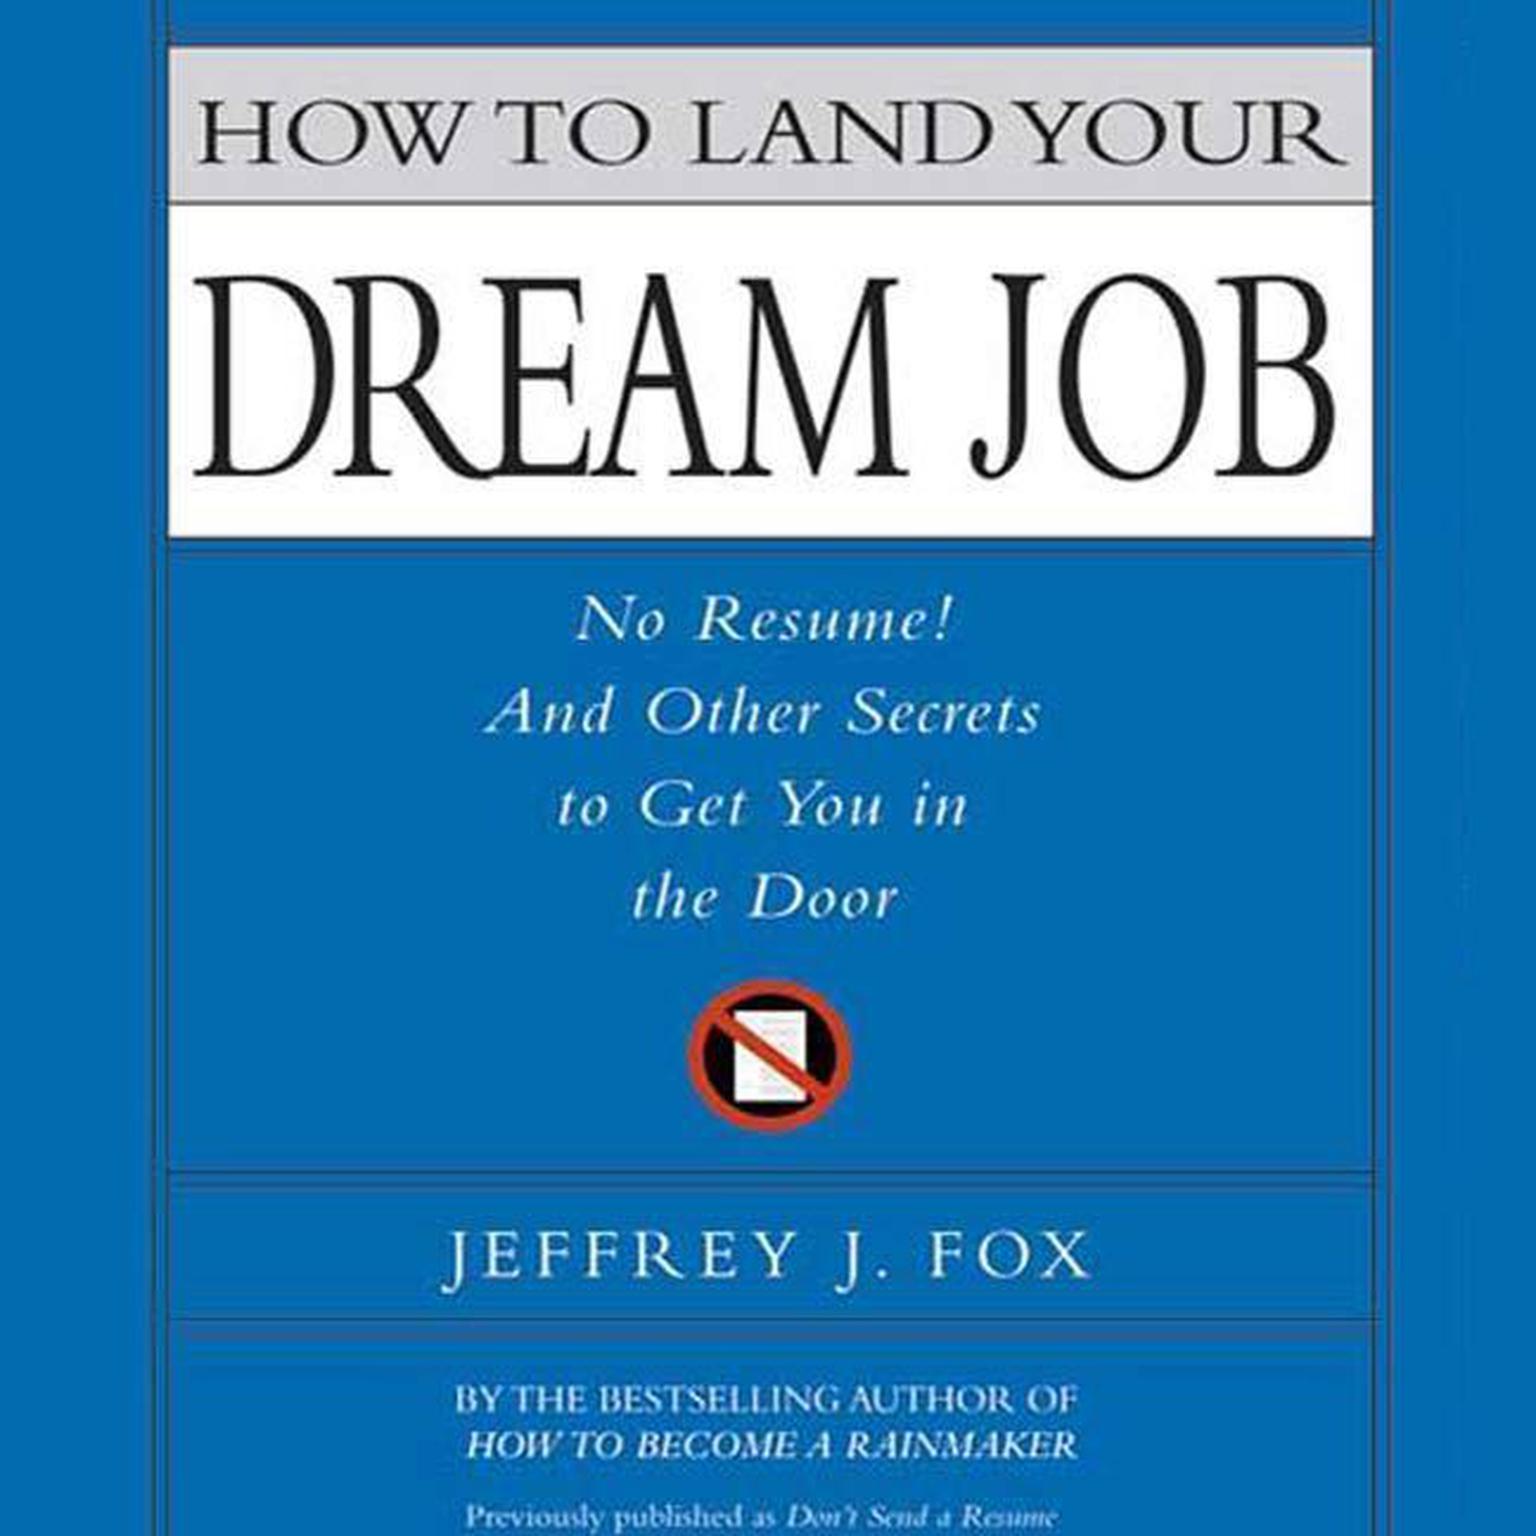 How to Land Your Dream Job (Abridged): No Resume! And Other Secrets to Get You in the Door Audiobook, by Jeffrey J. Fox